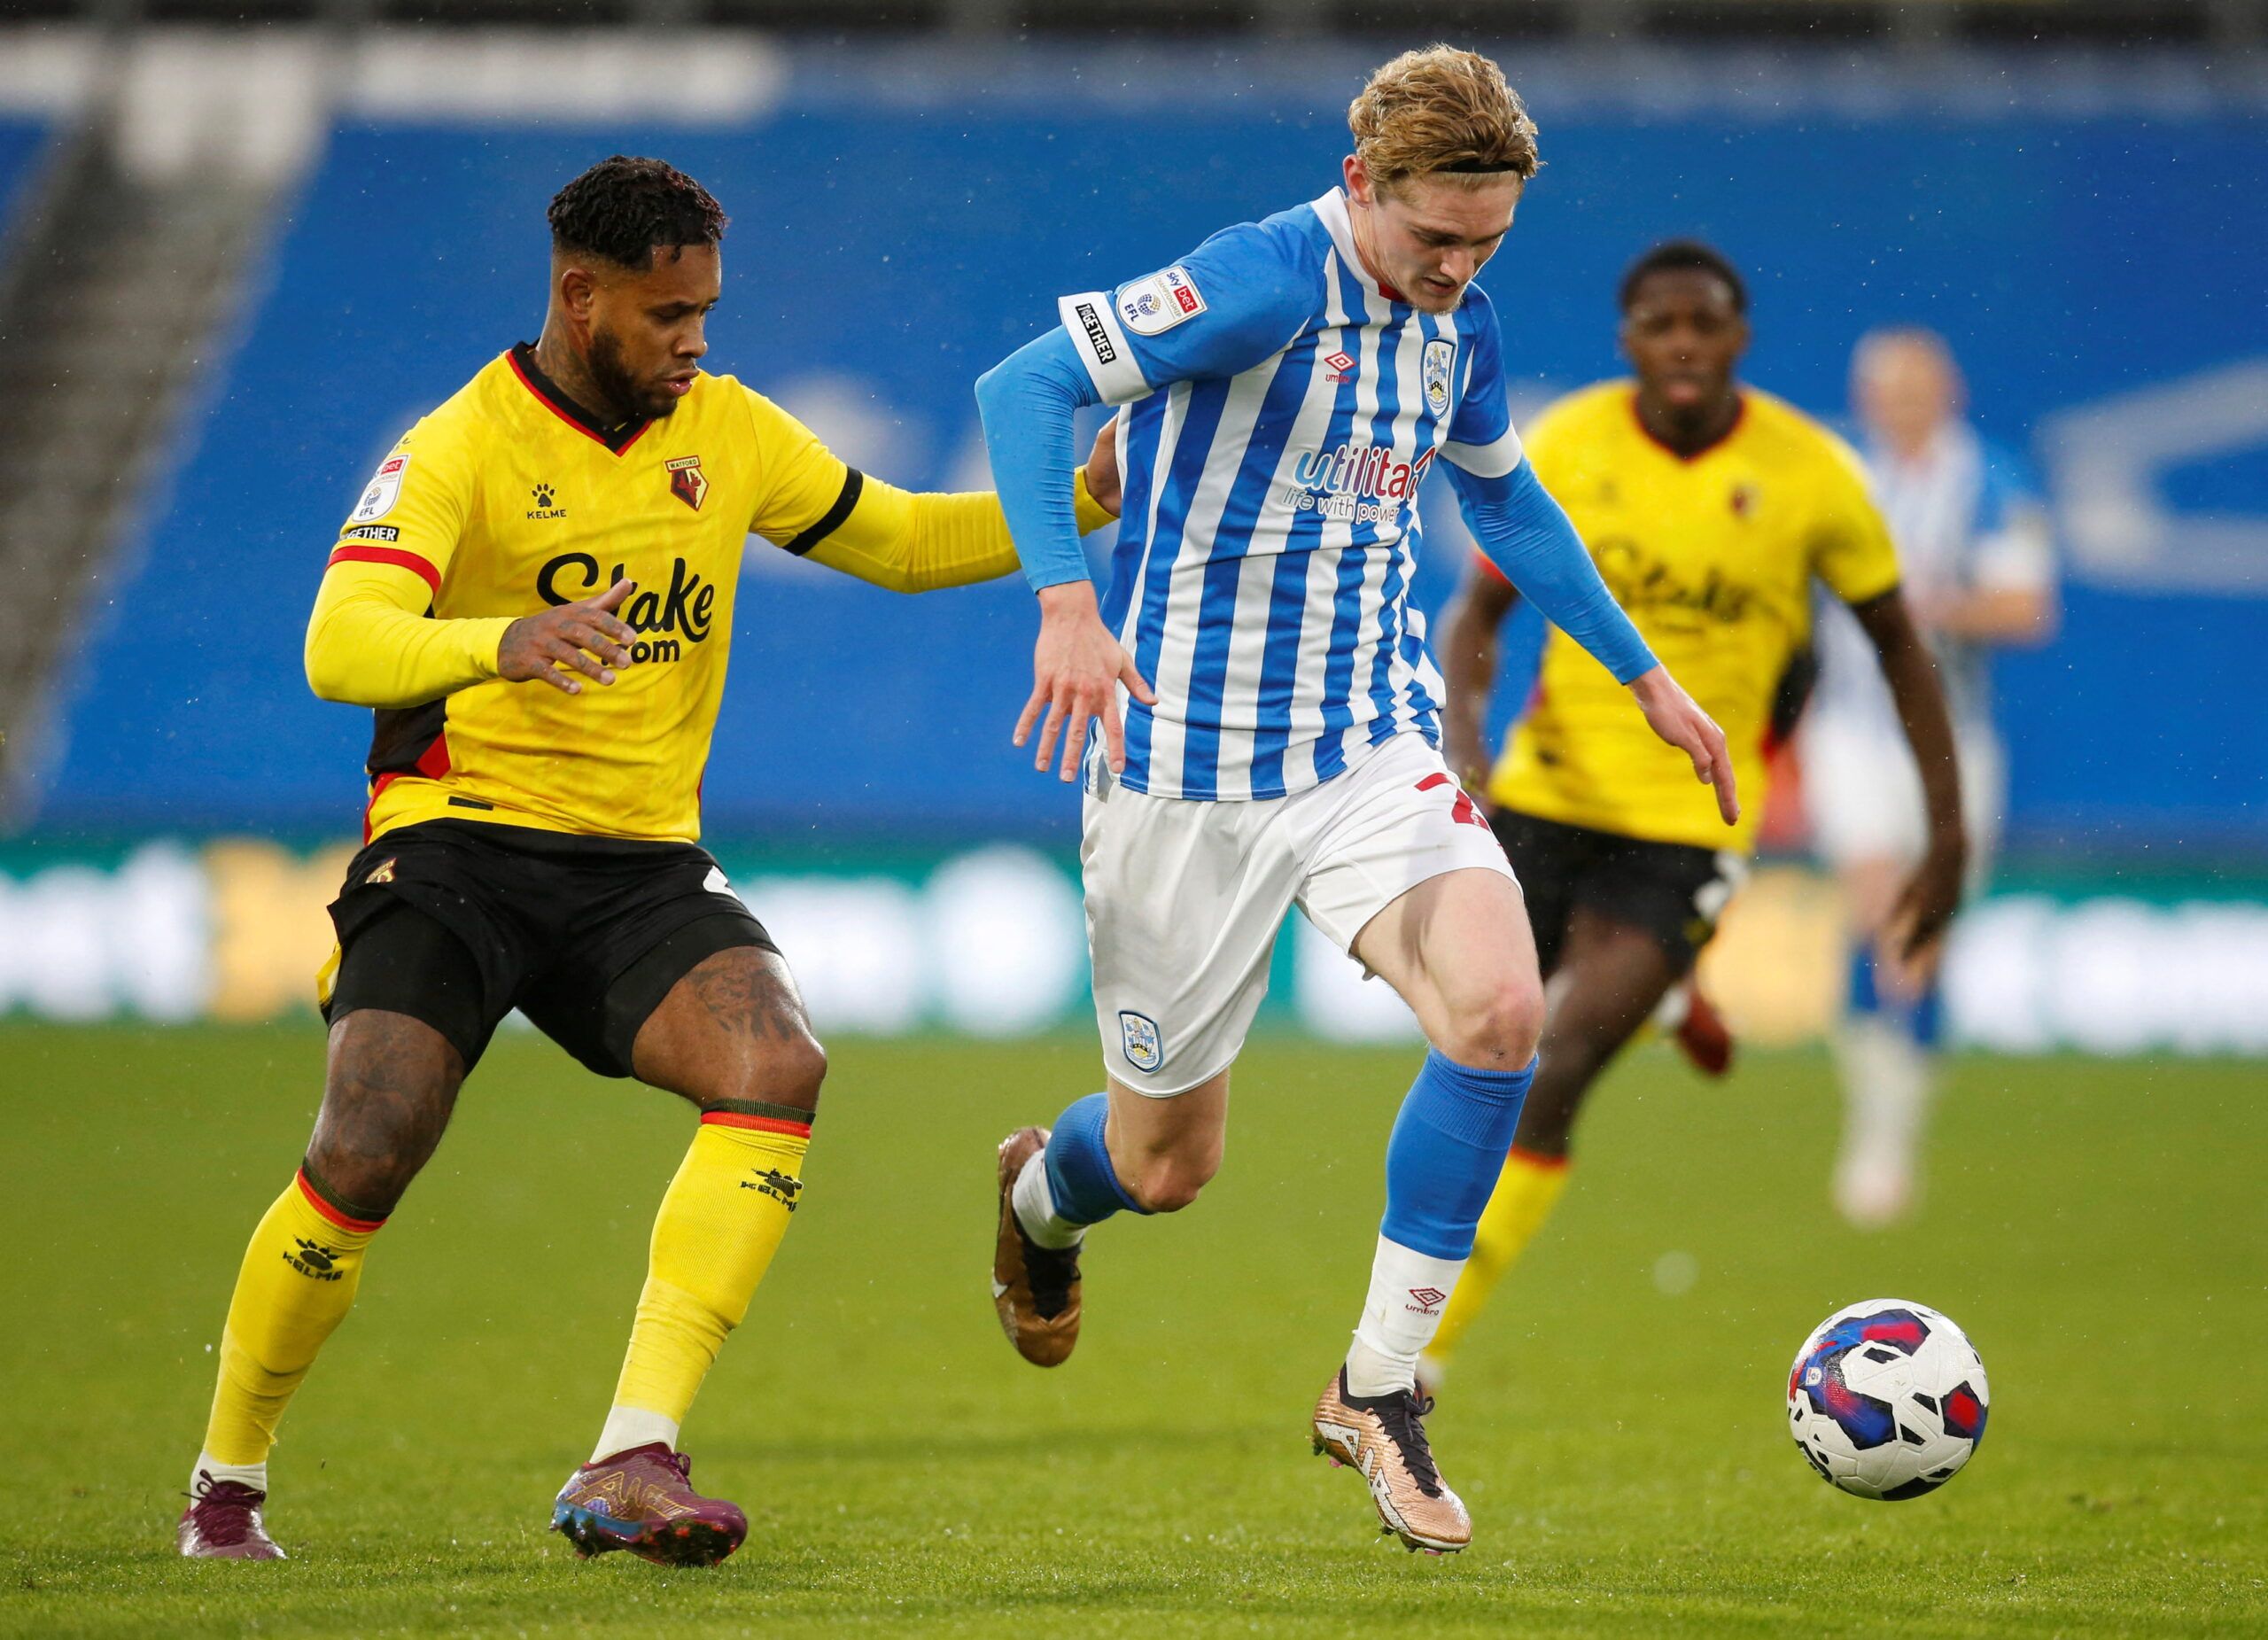 Soccer Football - Championship - Huddersfield Town v Watford - John Smith's Stadium, Huddersfield, Britain - December 17, 2022 Watford's Leandro Bacuna in action with Huddersfield Town's Jack Rudoni  Action Images/Ed Sykes  EDITORIAL USE ONLY. No use with unauthorized audio, video, data, fixture lists, club/league logos or 